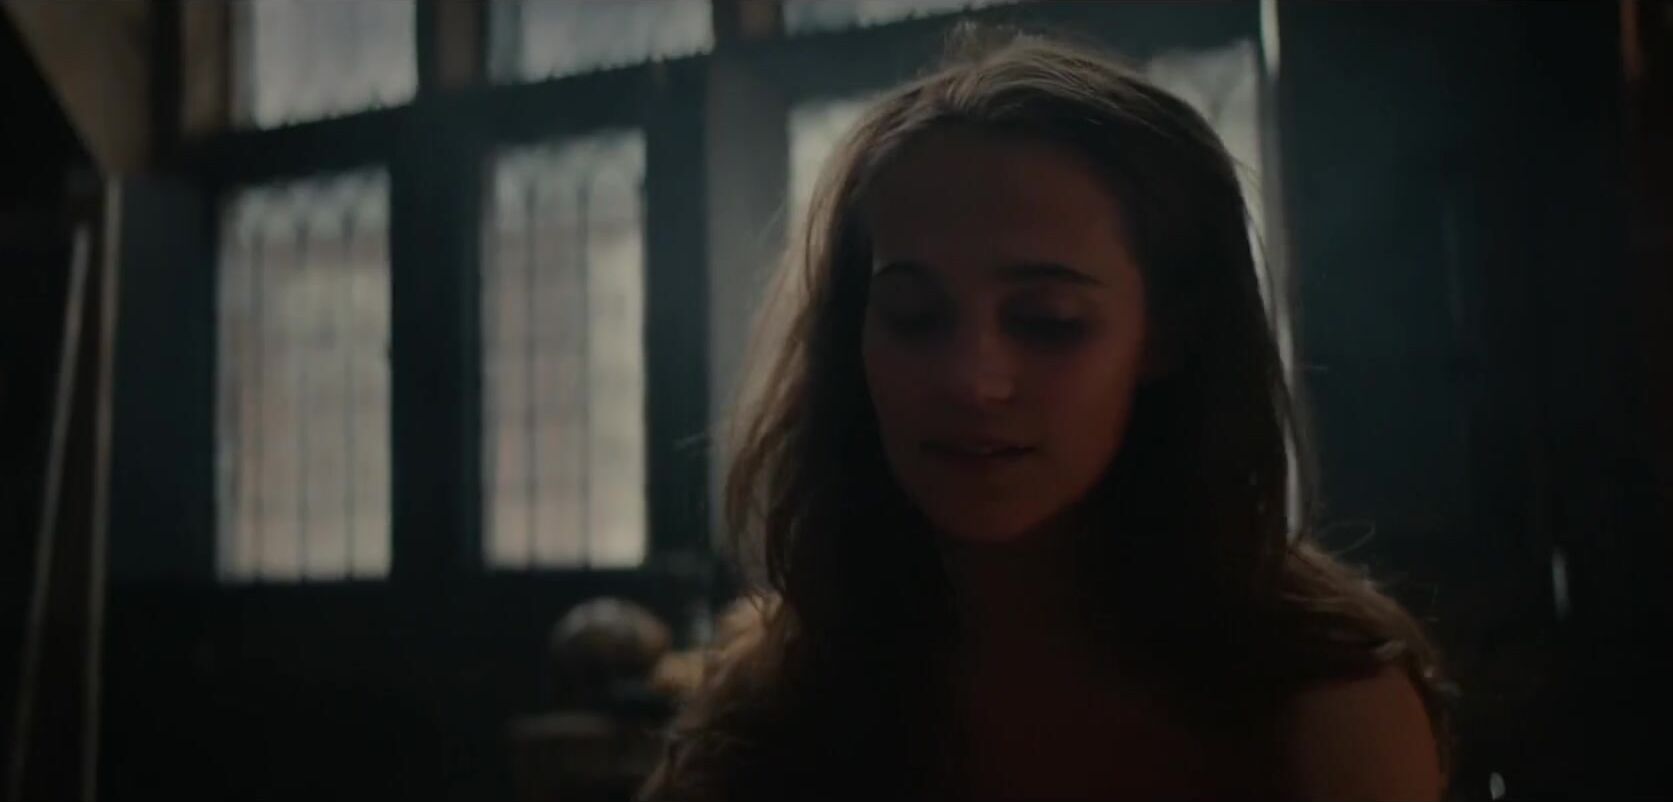 IAFD Hot sex scenes of Alicia Vikander and other actresses being penetrated in Tulip Fever Brazil